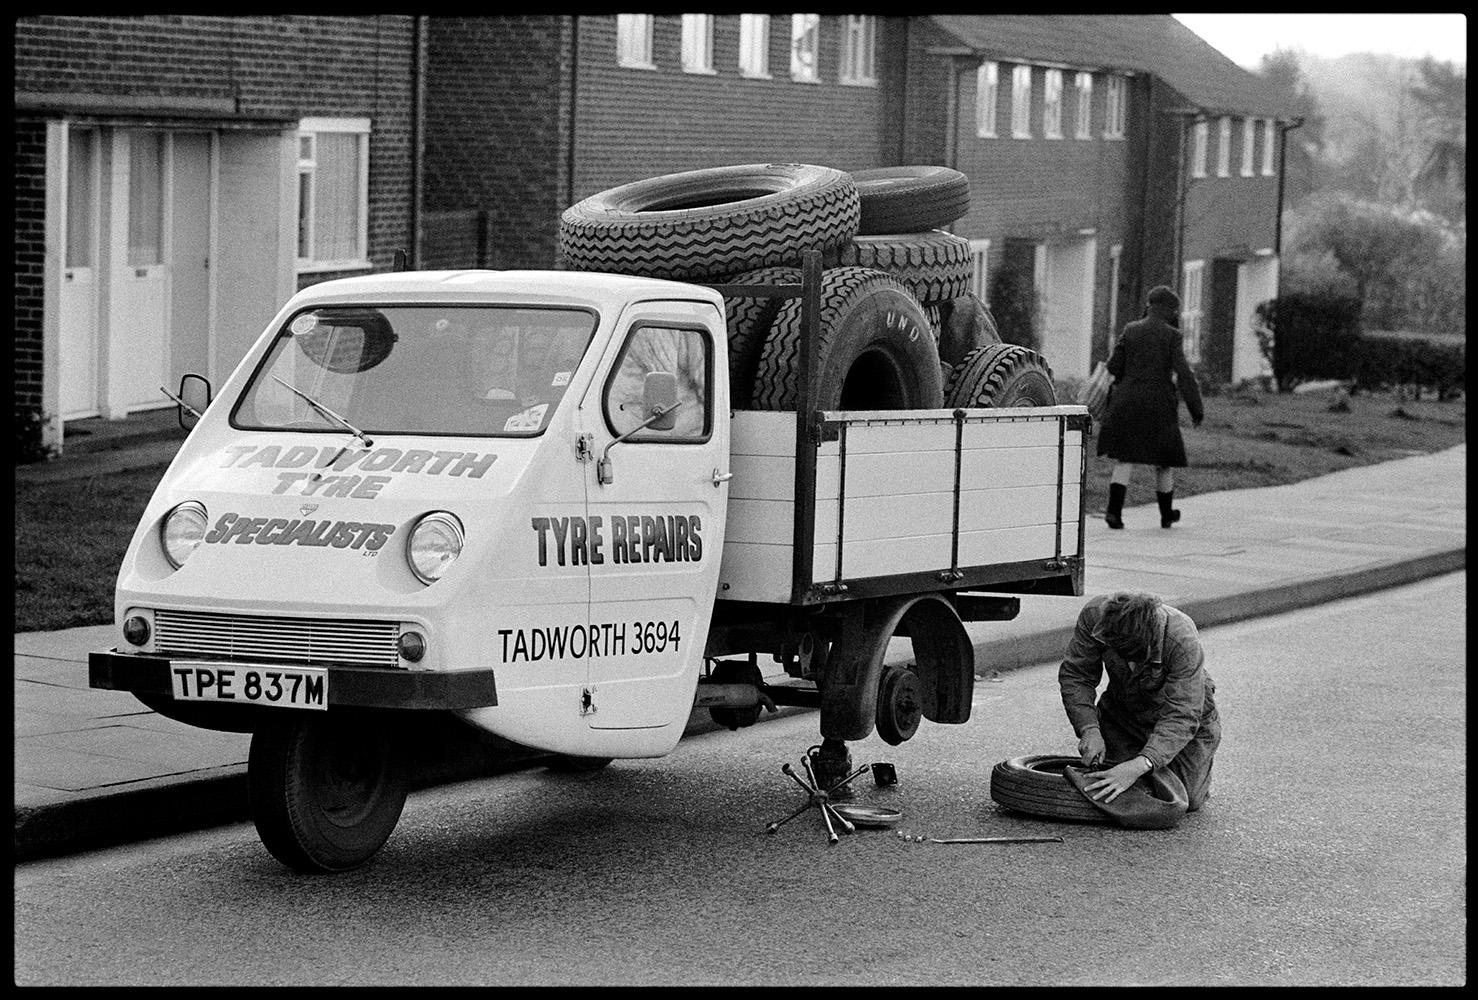 Tyre Repairs

By Arthur Steel 

Paper size: 54 x 41" / 137 x 104 cm

Silver Gelatin Print
1970 (printed later)
unframed
hand signed
edition of 20

note other print sizes and framing options are available, please enquire for details


Regarded as a